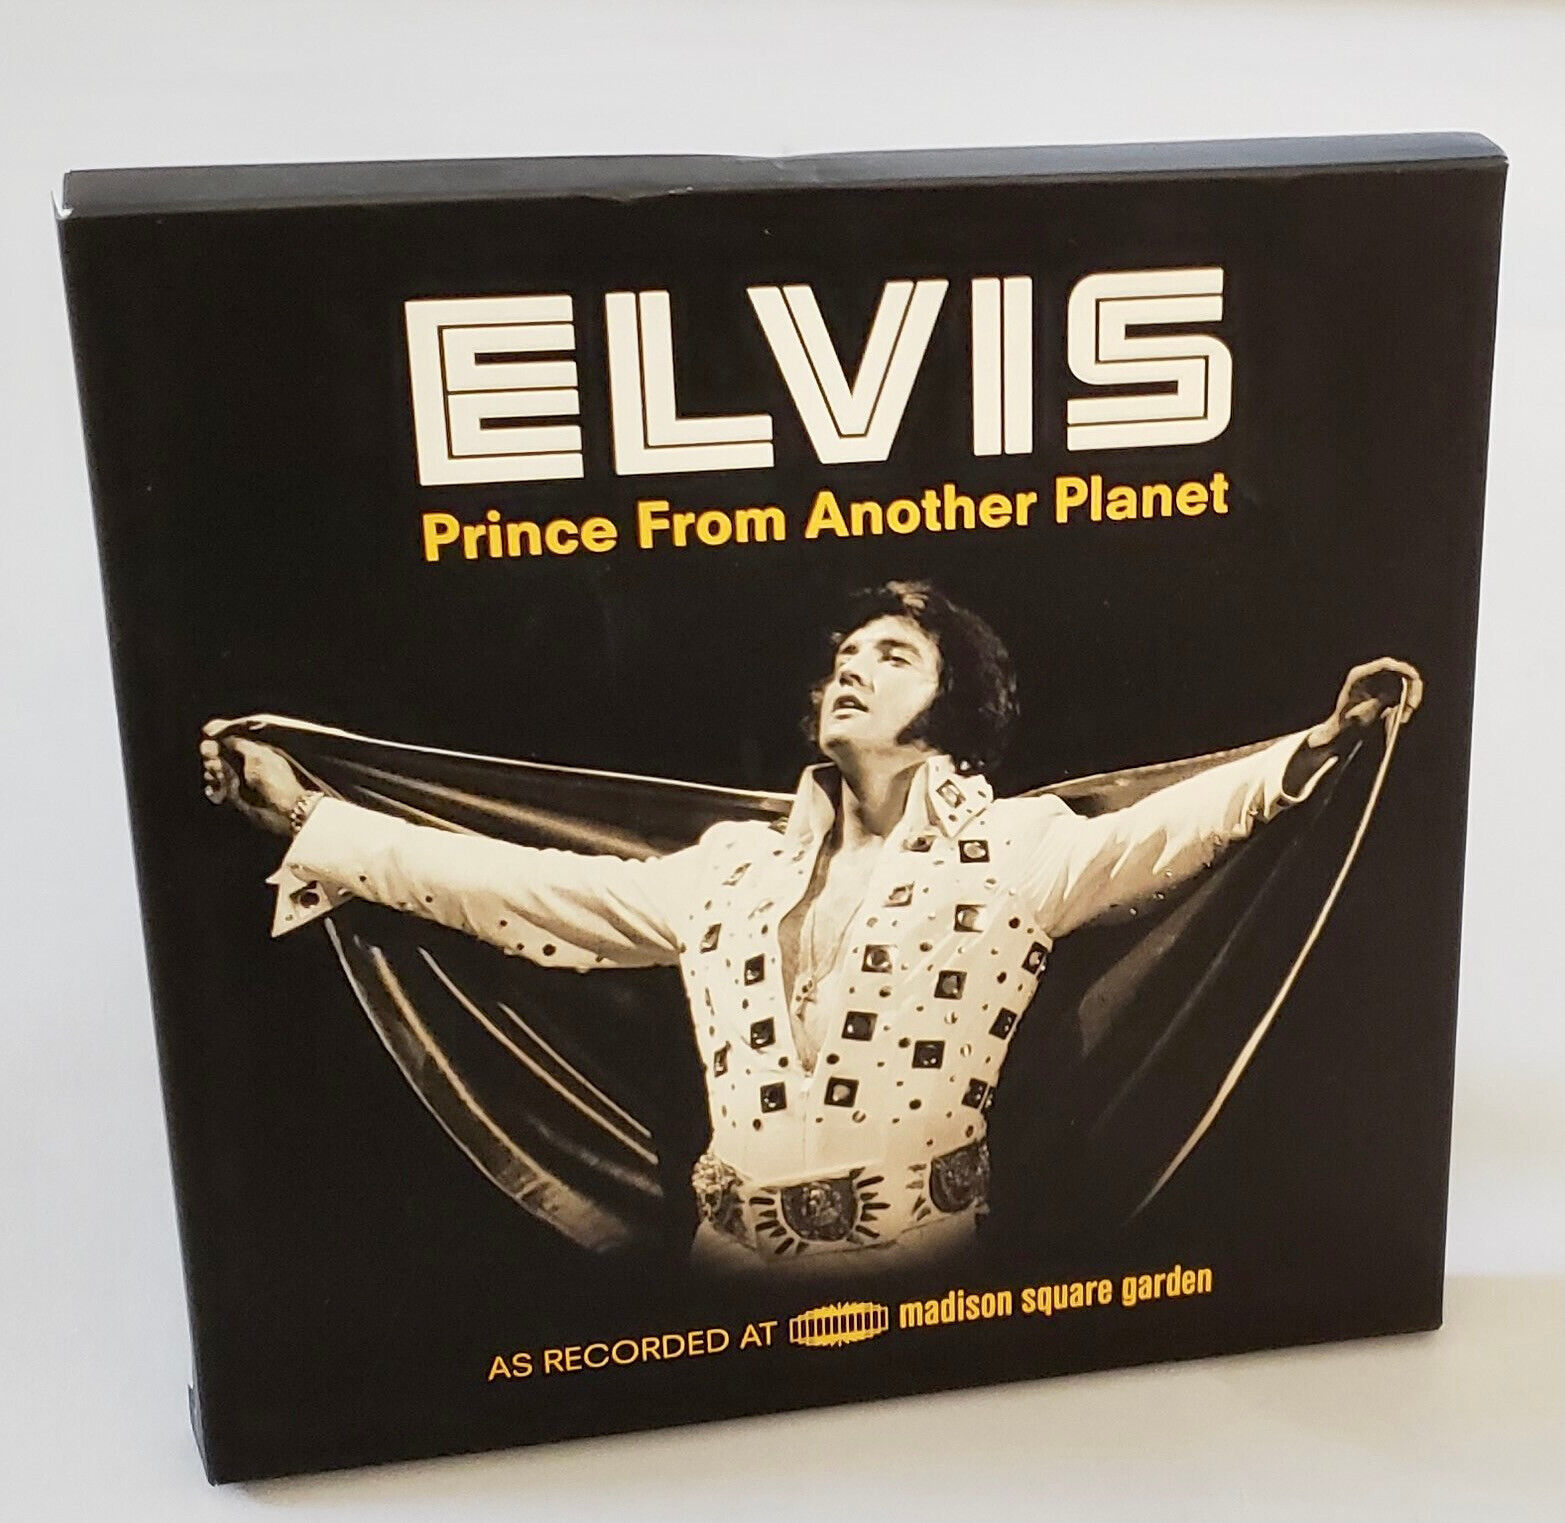 ELVIS PRESLEY - Prince From Another Planet (deluxe version) - 2 CD/ 1 DVD - Box